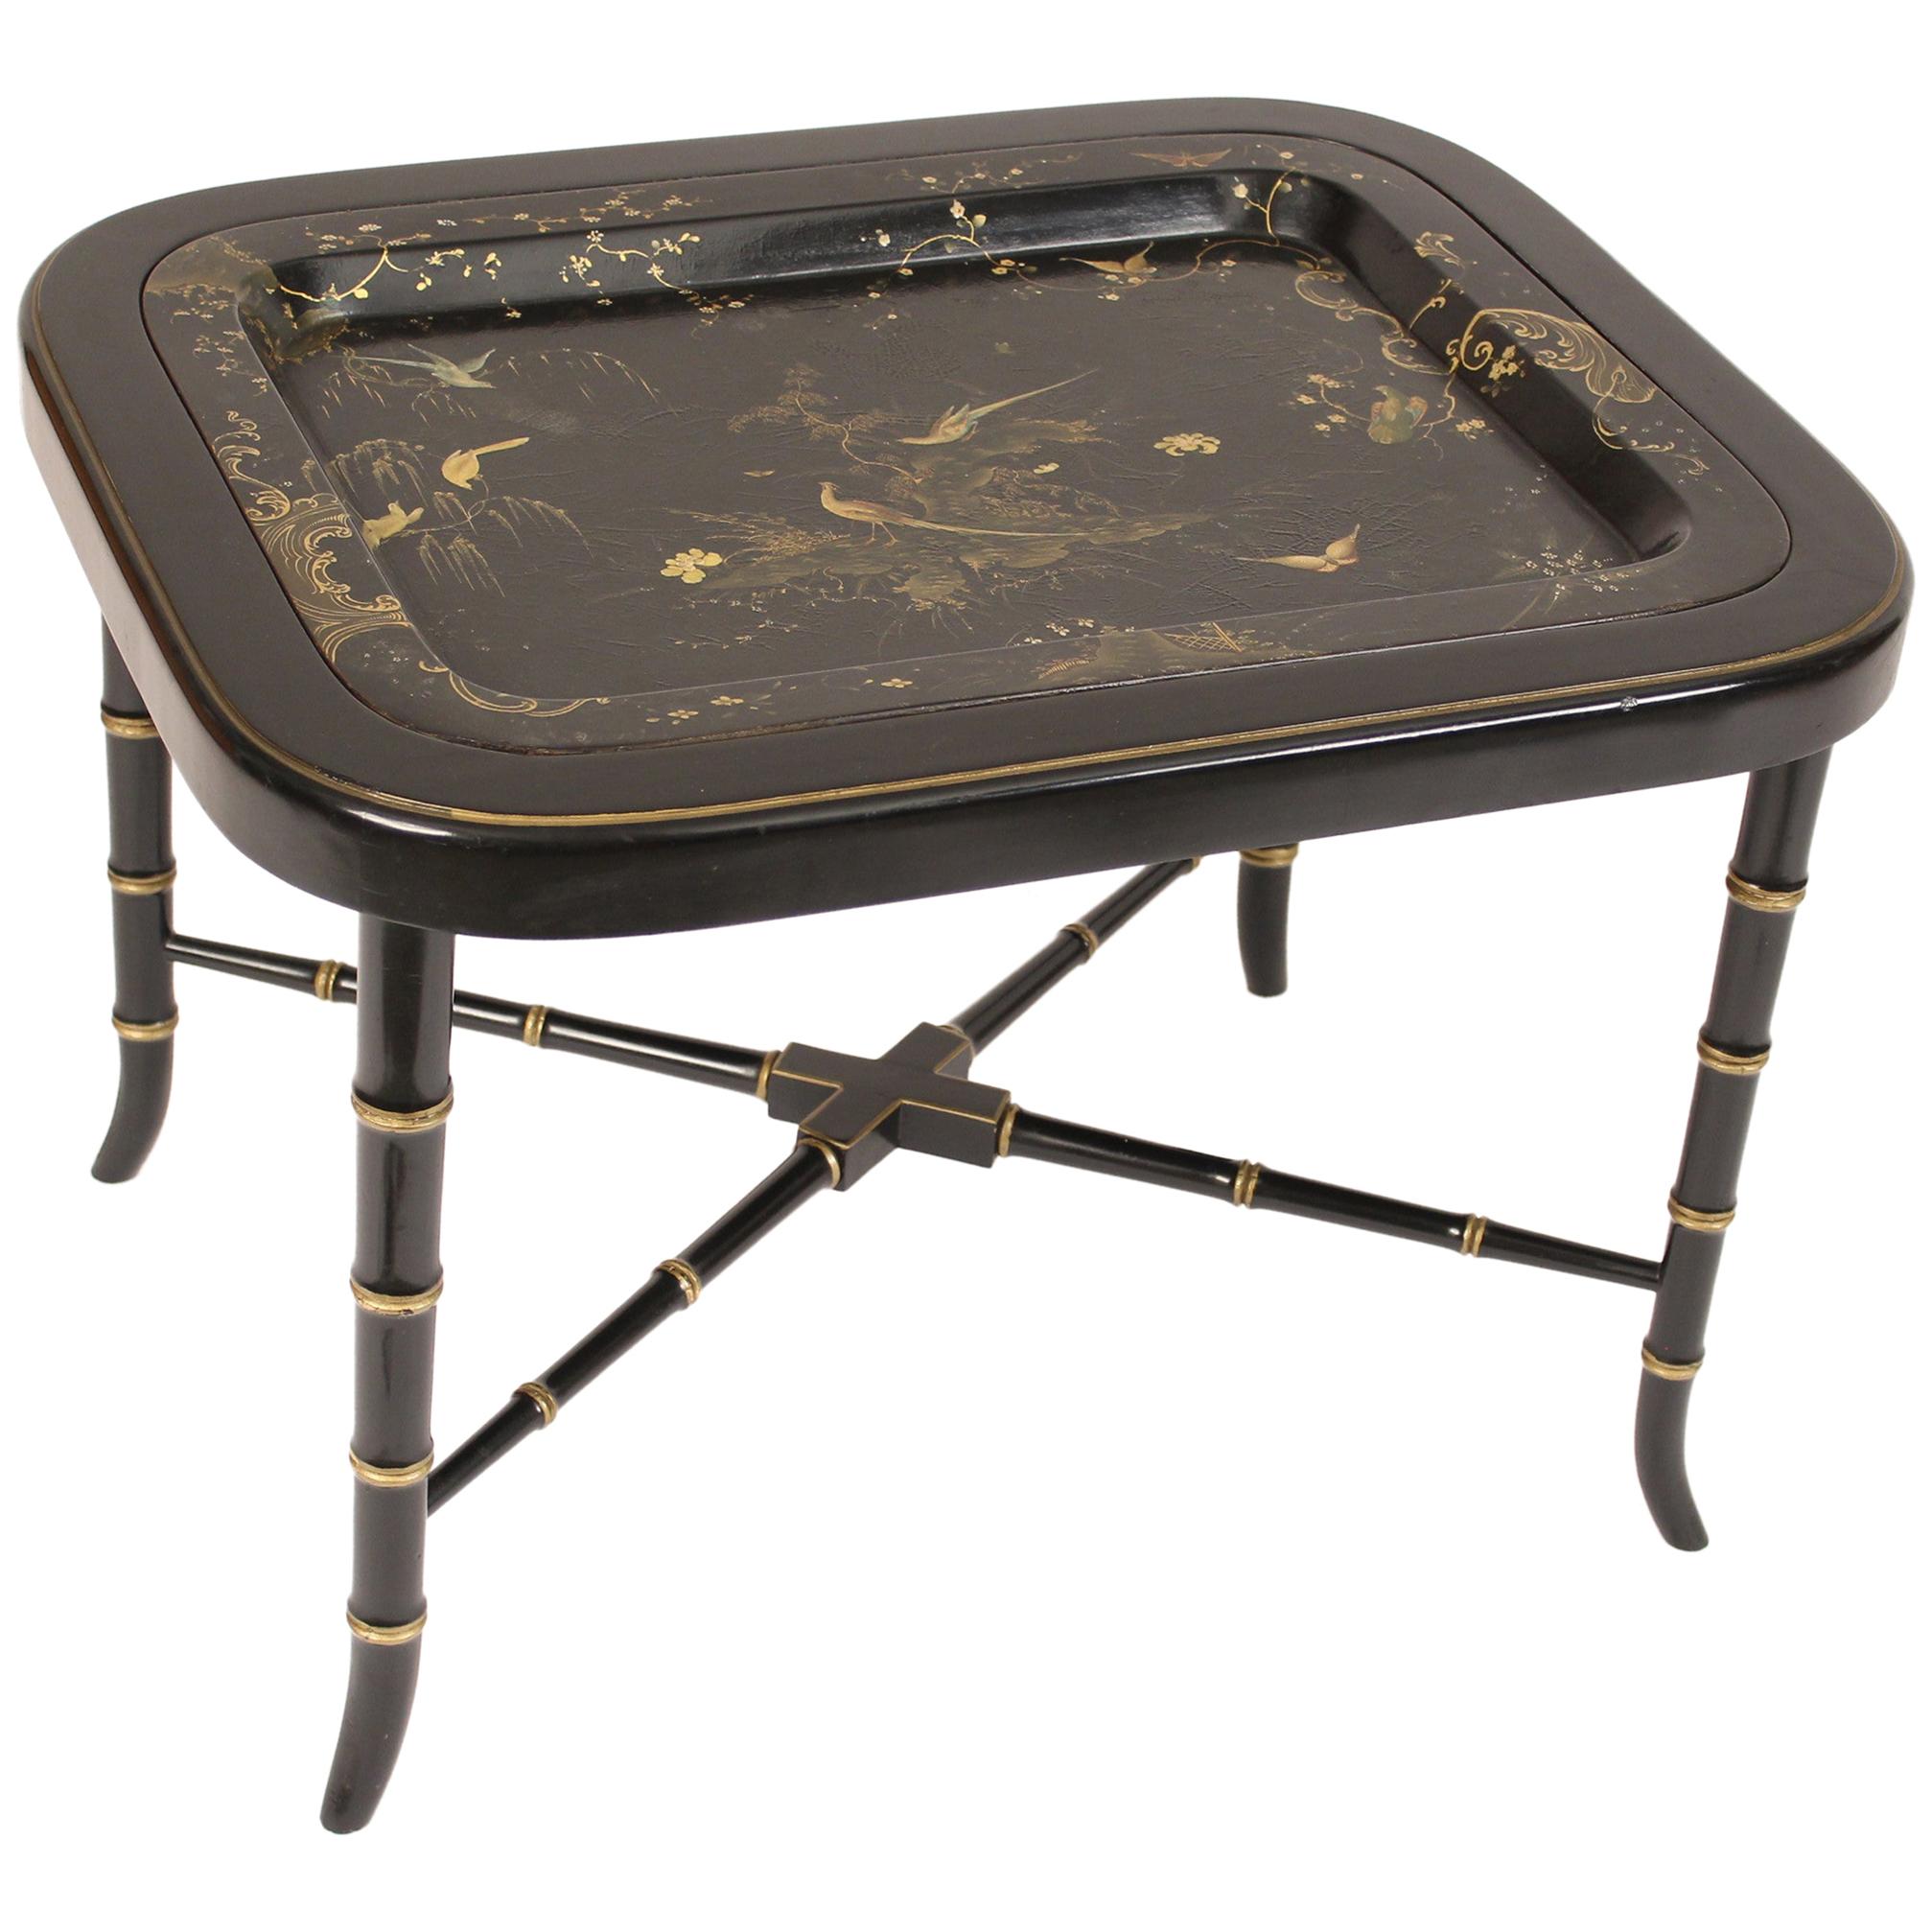 English Regency Style Black Lacquer Tray Table